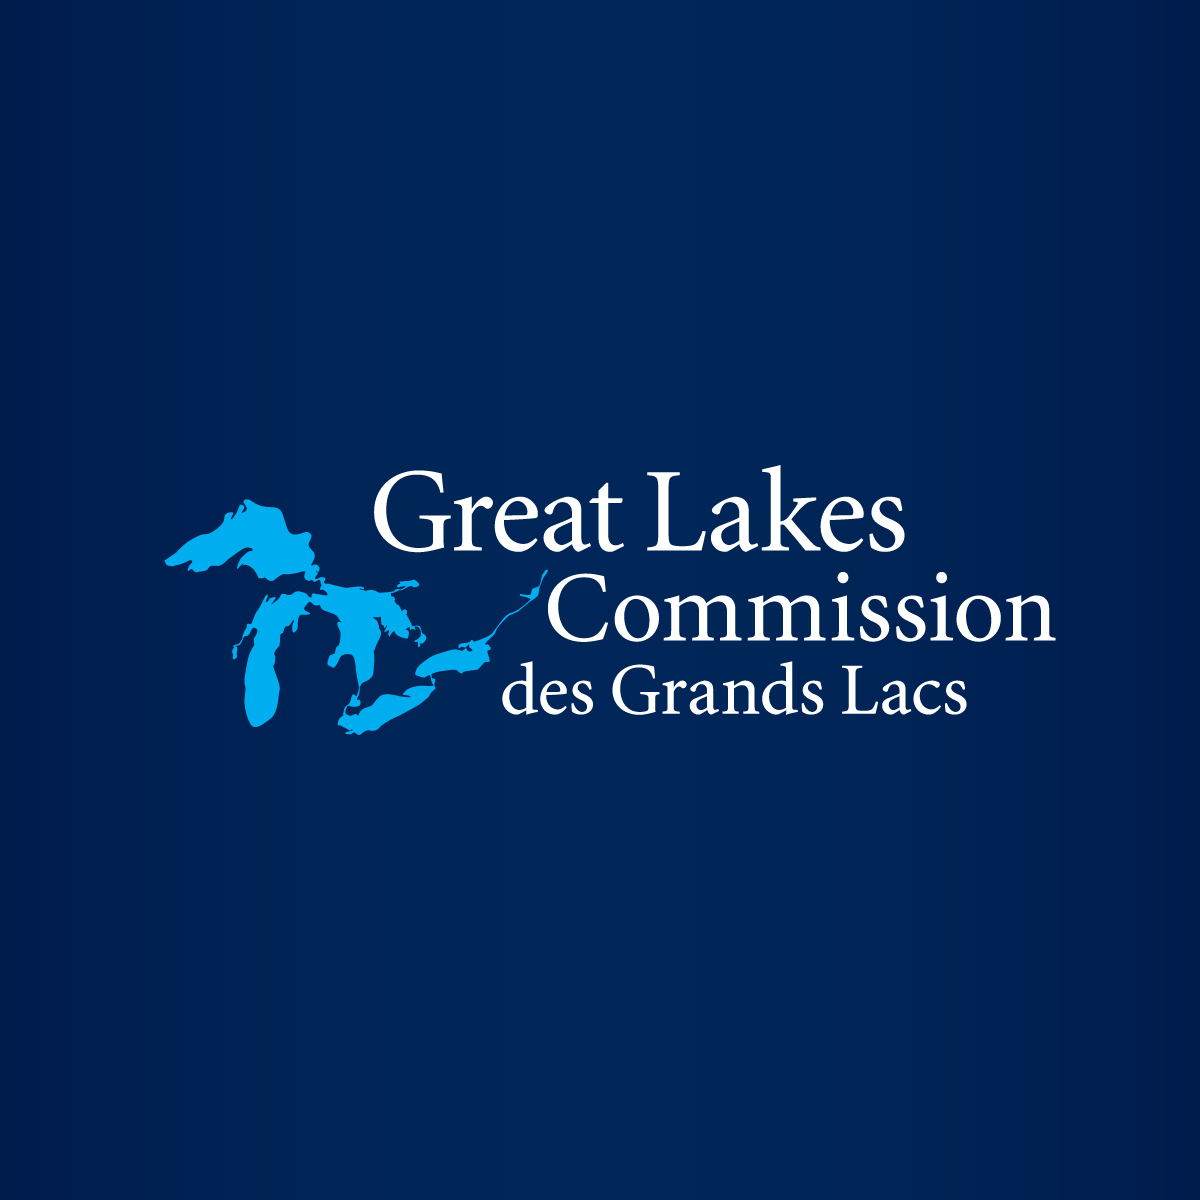 record setting attempt to paddleboard across all 5 great lakes continues this week